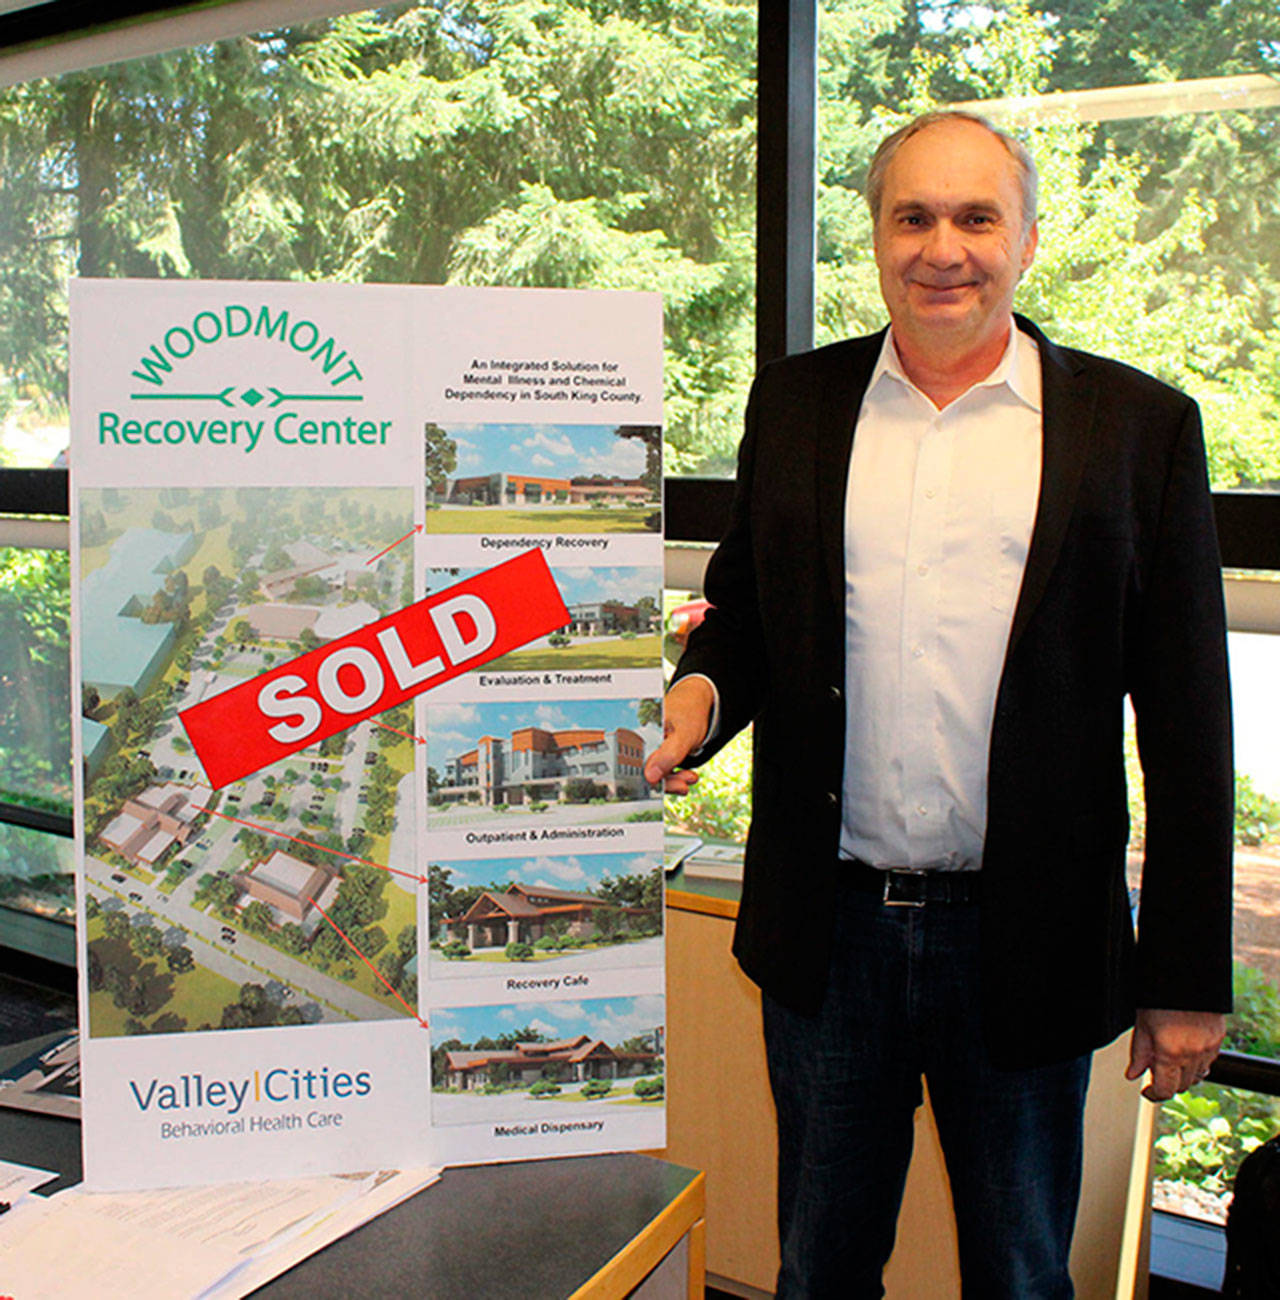 Valley Cities CEO Ken Taylor displays a ‘sold’ sign for the property that was to house the Woodmont Recovery Center. RAECHEL DAWSON, Federal Way Mirror